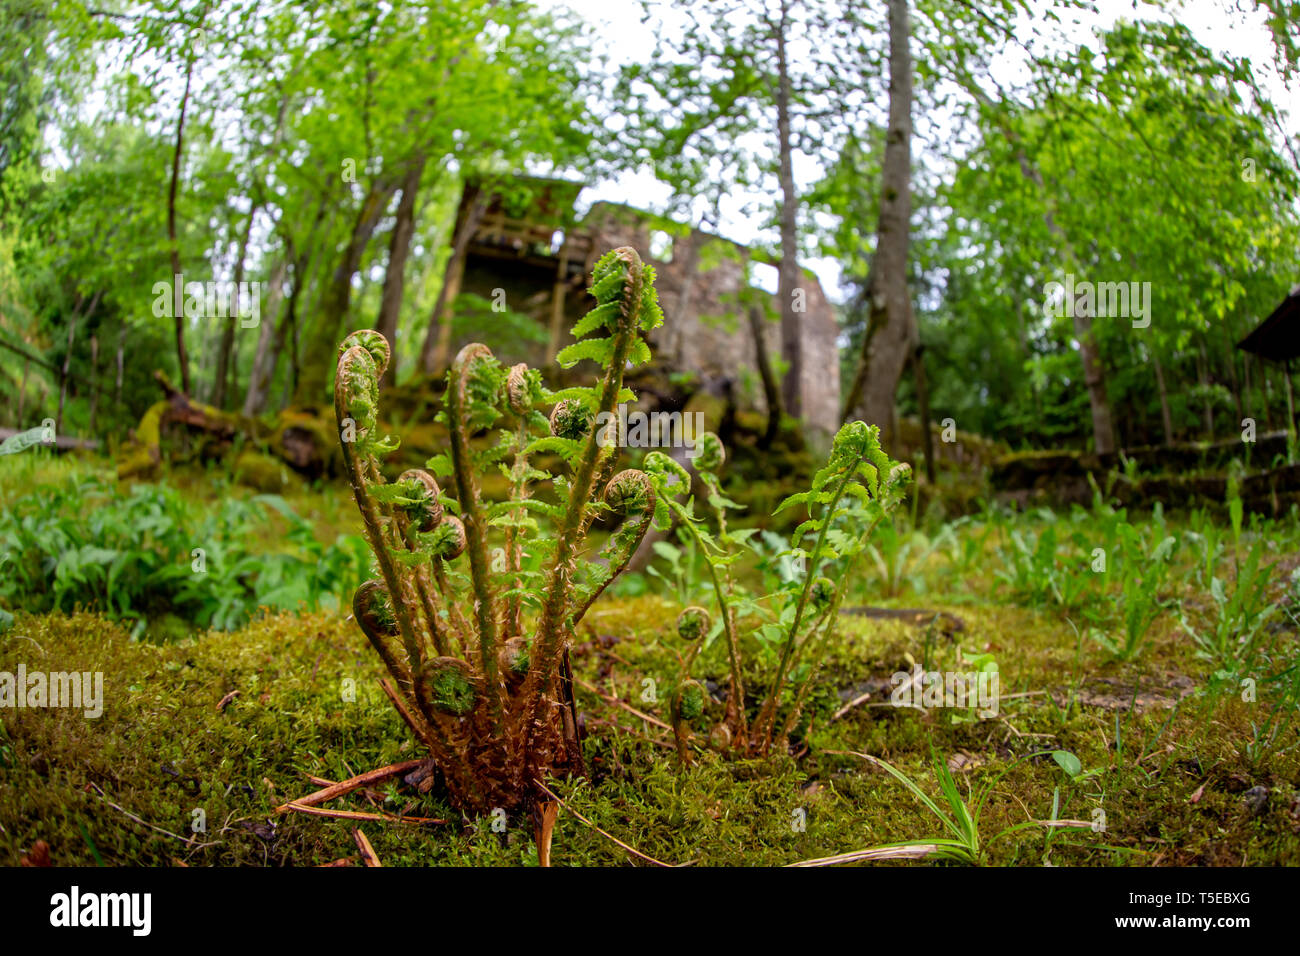 Fern in the foreground and old mill in the background. Beautiful forest park with ferns and ruins of watermill in Latvia. Shot with fisheye lens. Stock Photo